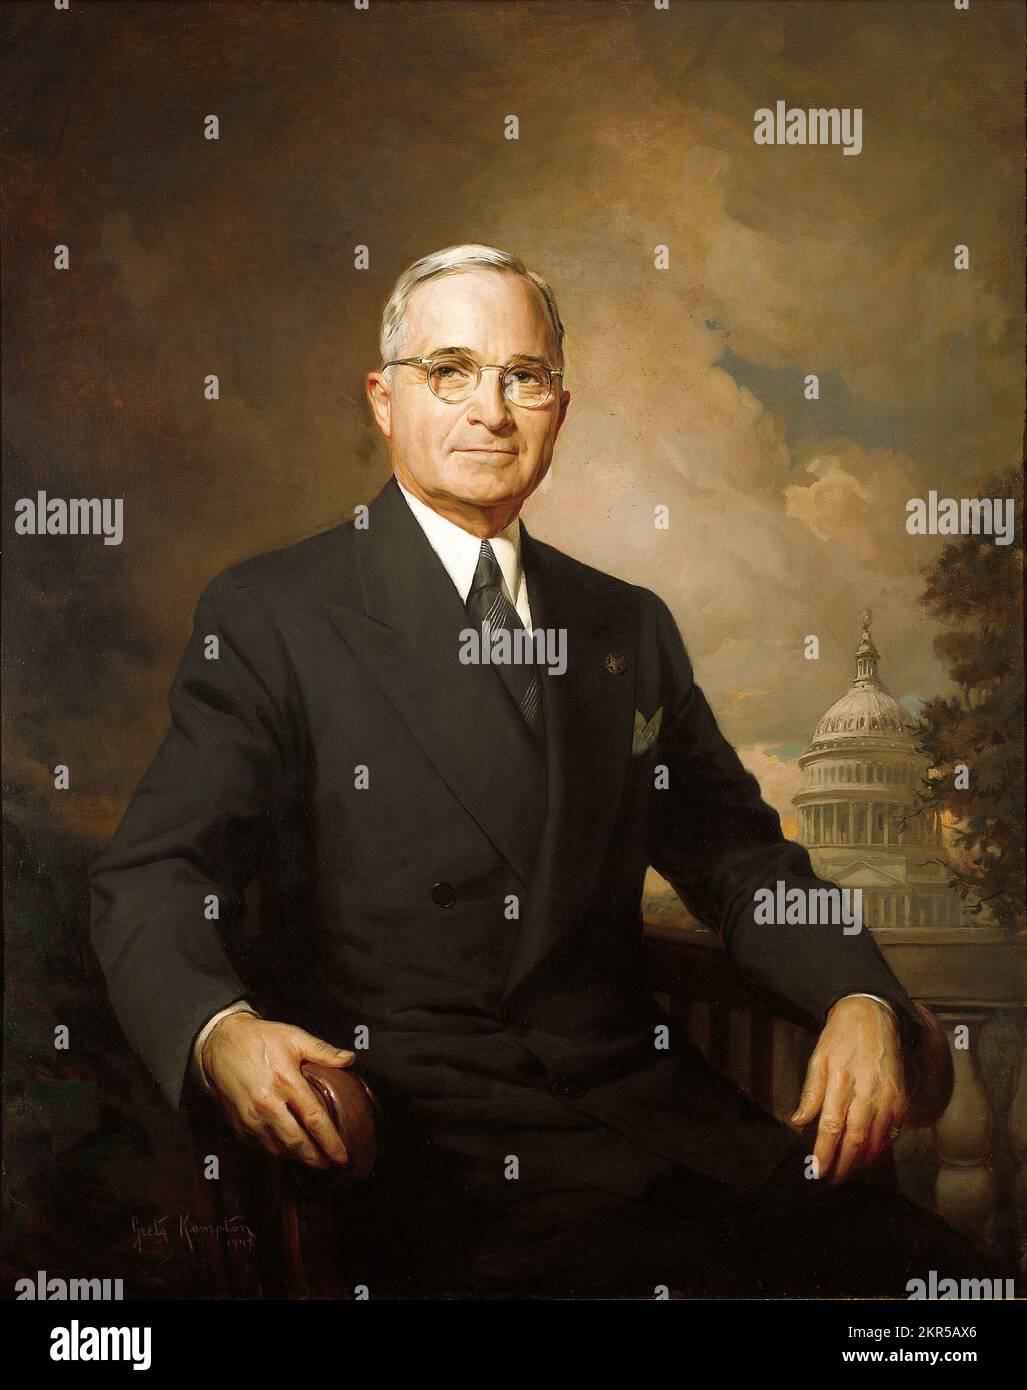 Official portrait of President Truman by Greta Kempton, painted in 1945 Stock Photo